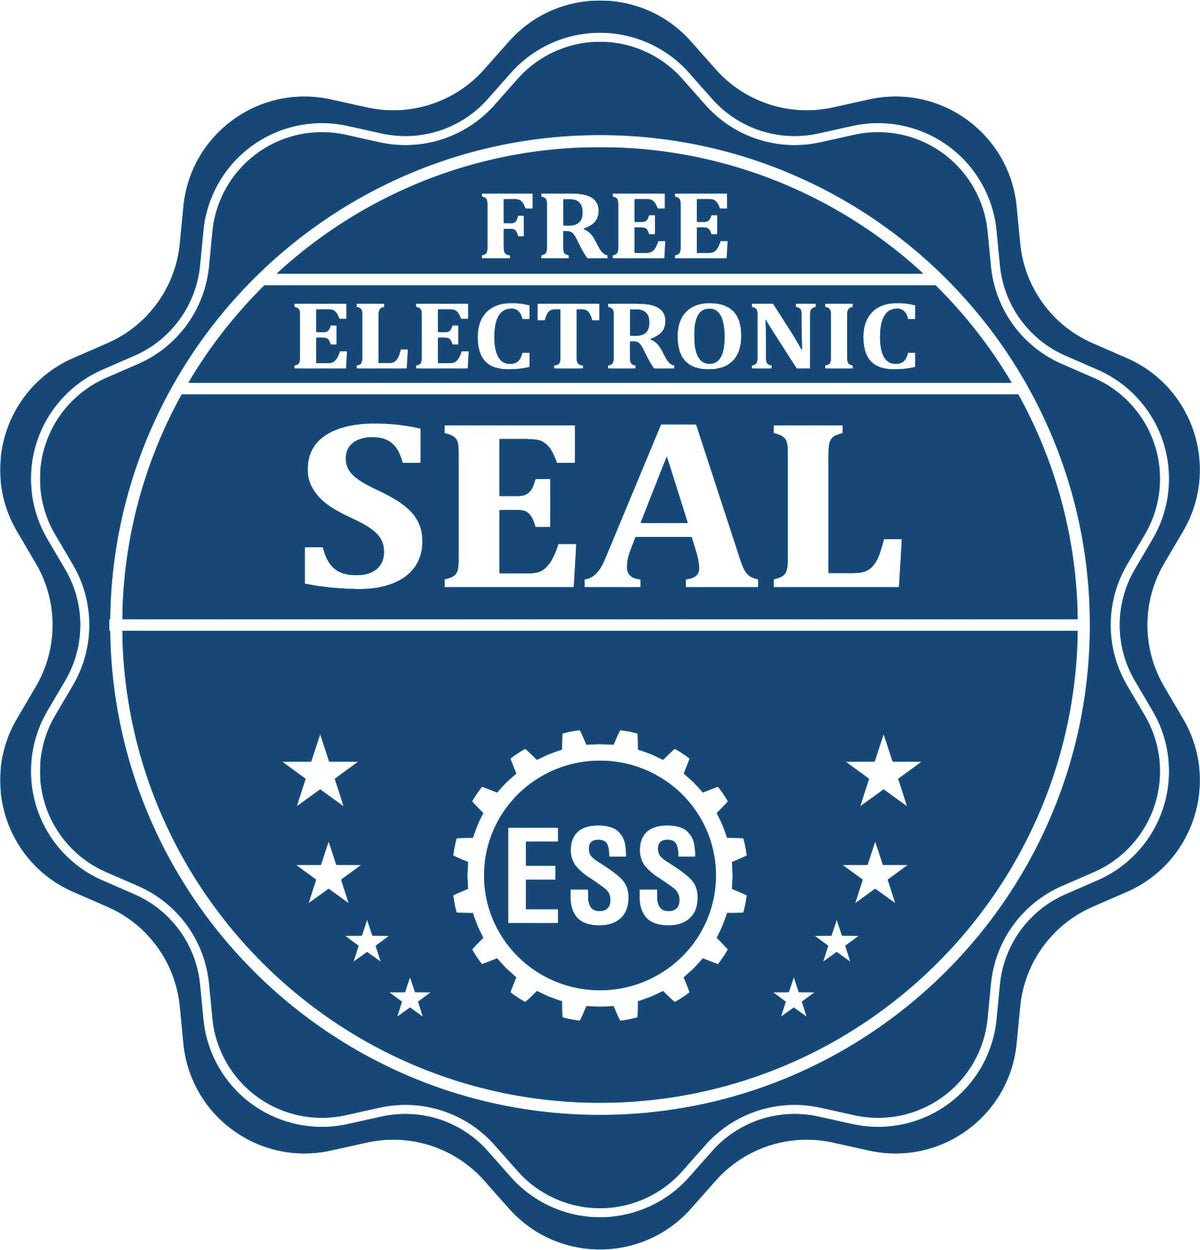 A badge showing a free electronic seal for the State of Connecticut Long Reach Architectural Embossing Seal with stars and the ESS gear on the emblem.